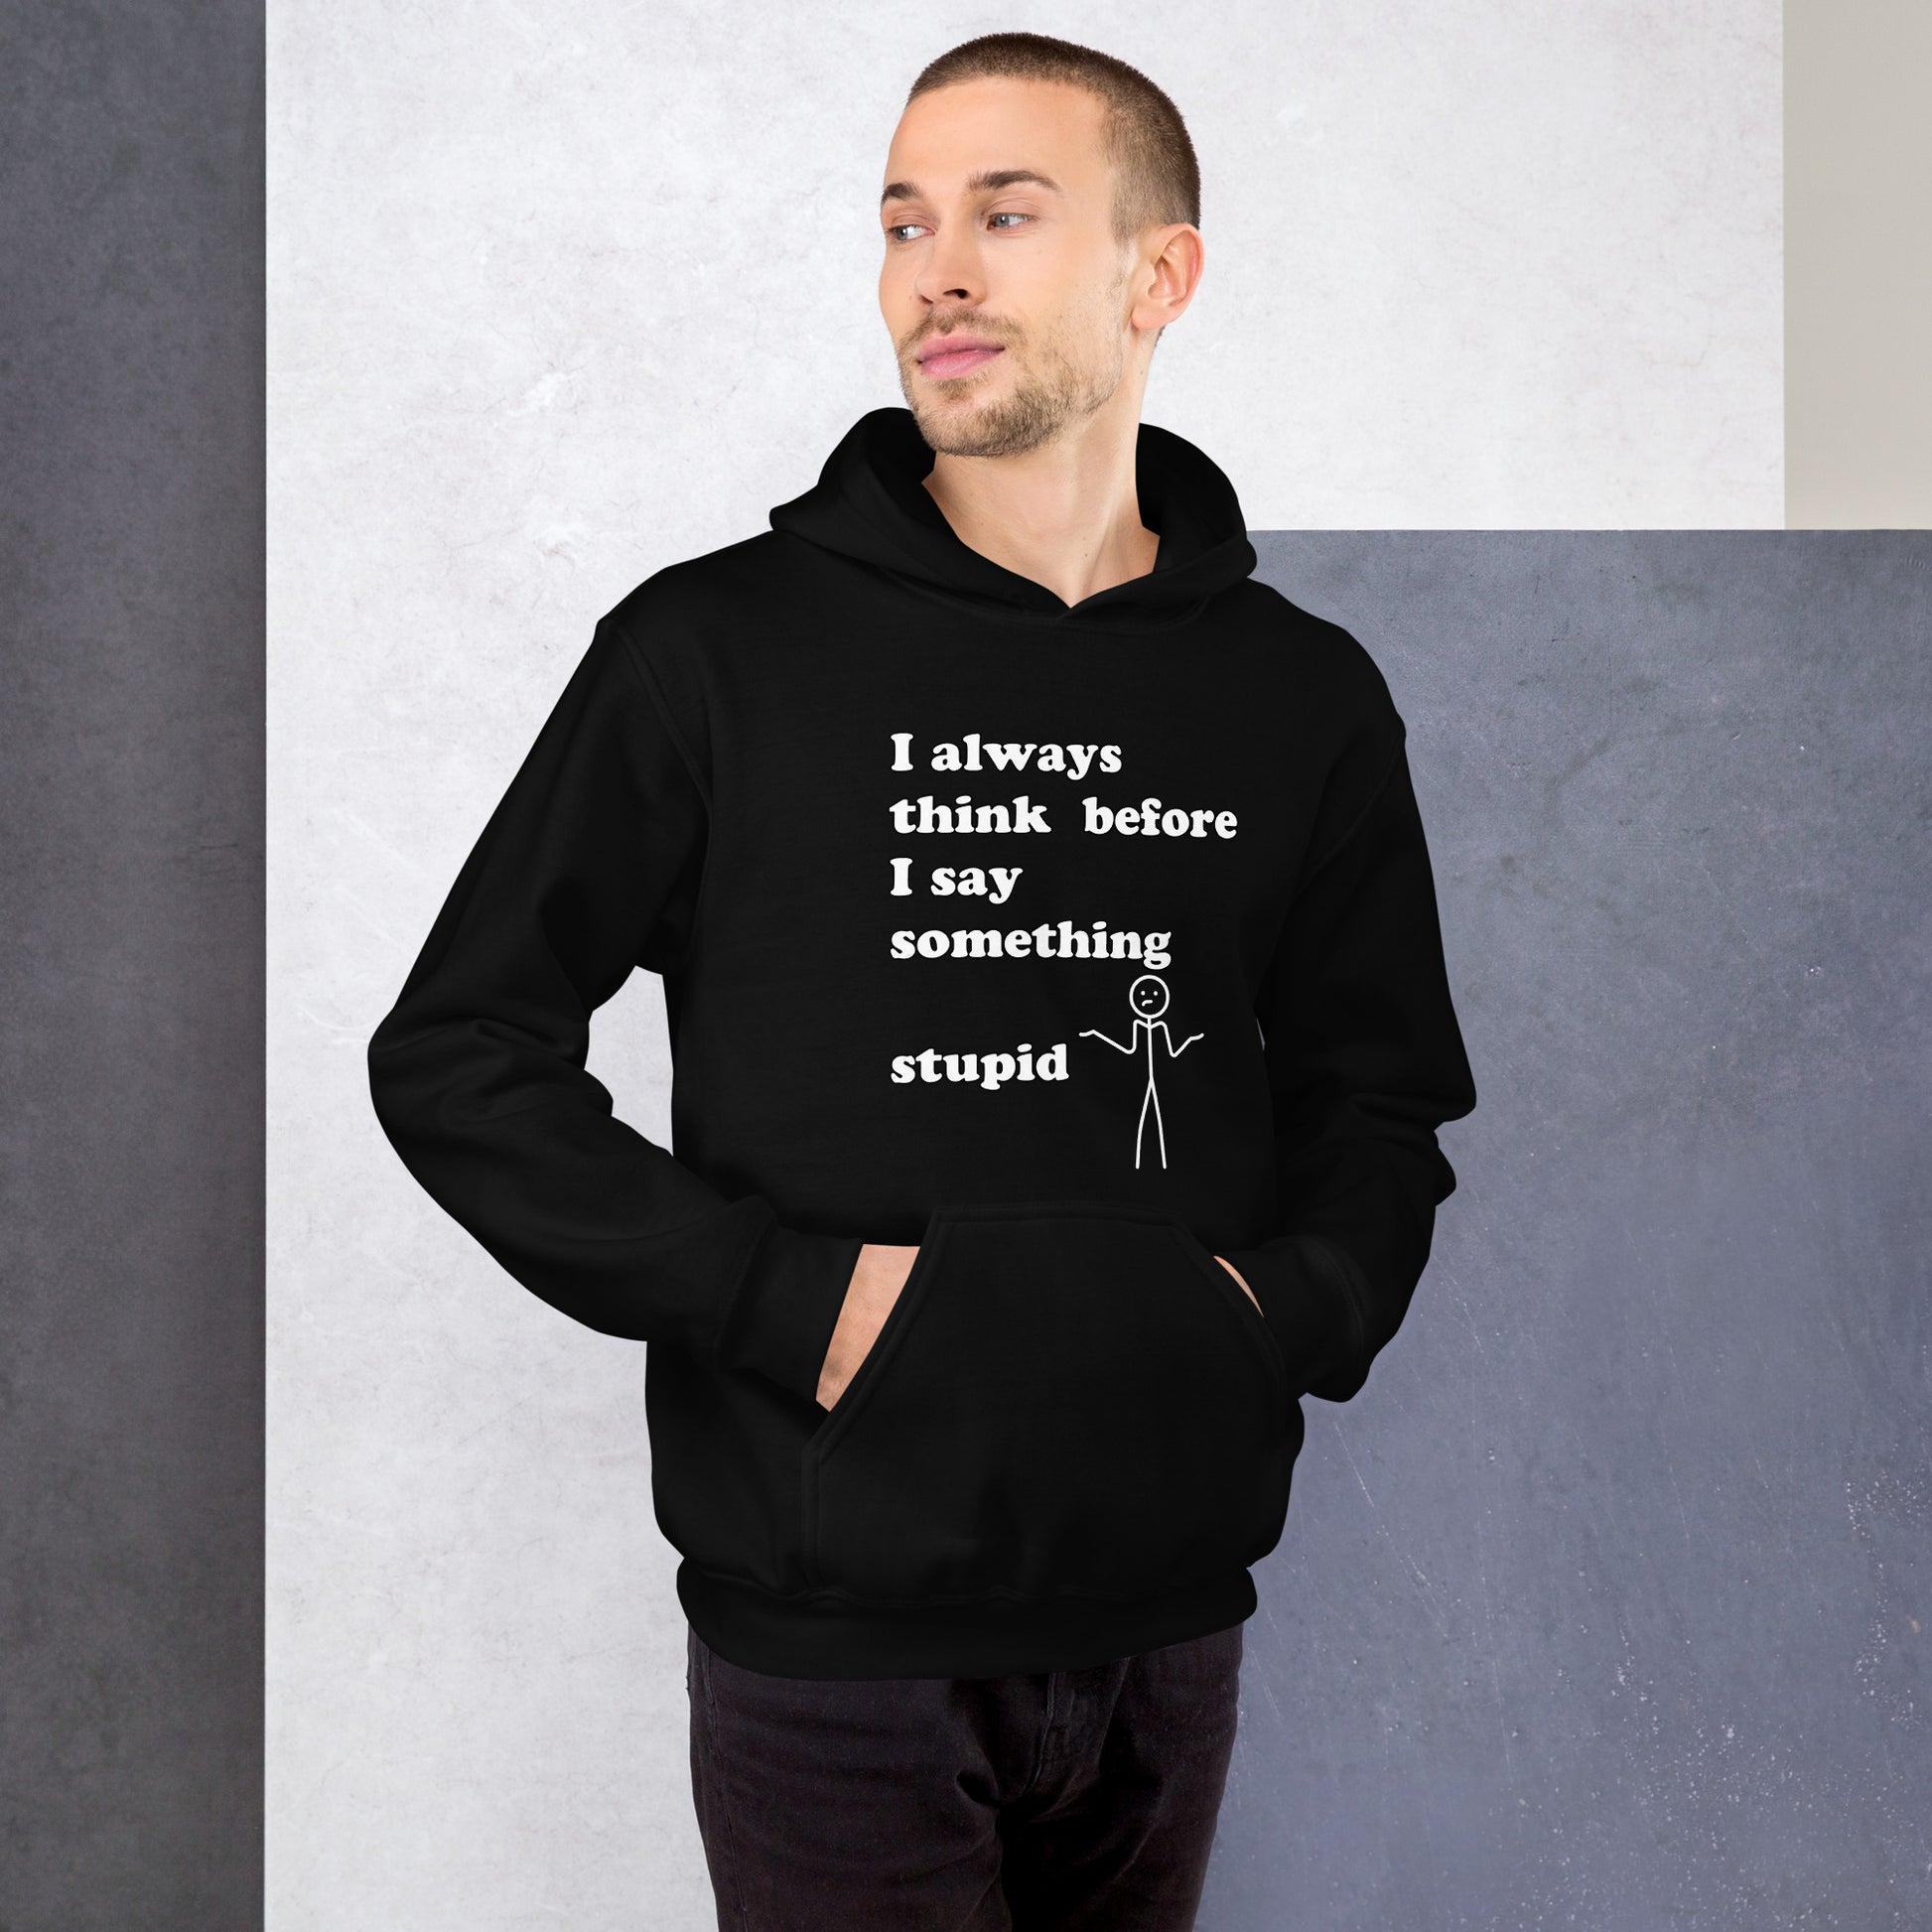 Man with black hoodie with text "I always think before I say something stupid"